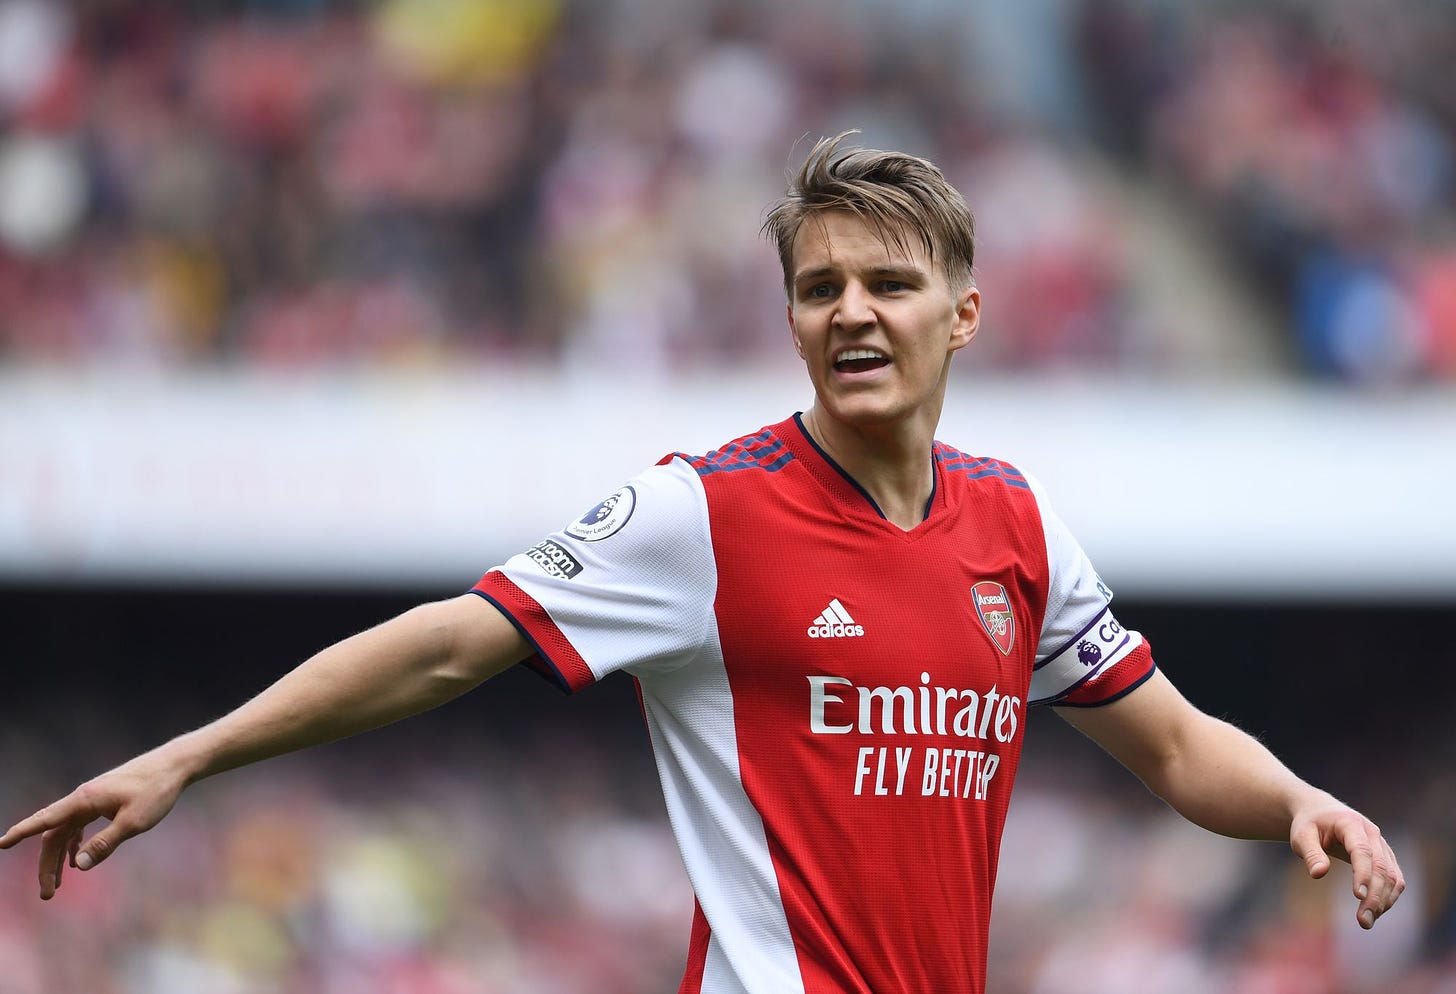 The importance of Martin Ødegaard to Arsenal's Attack